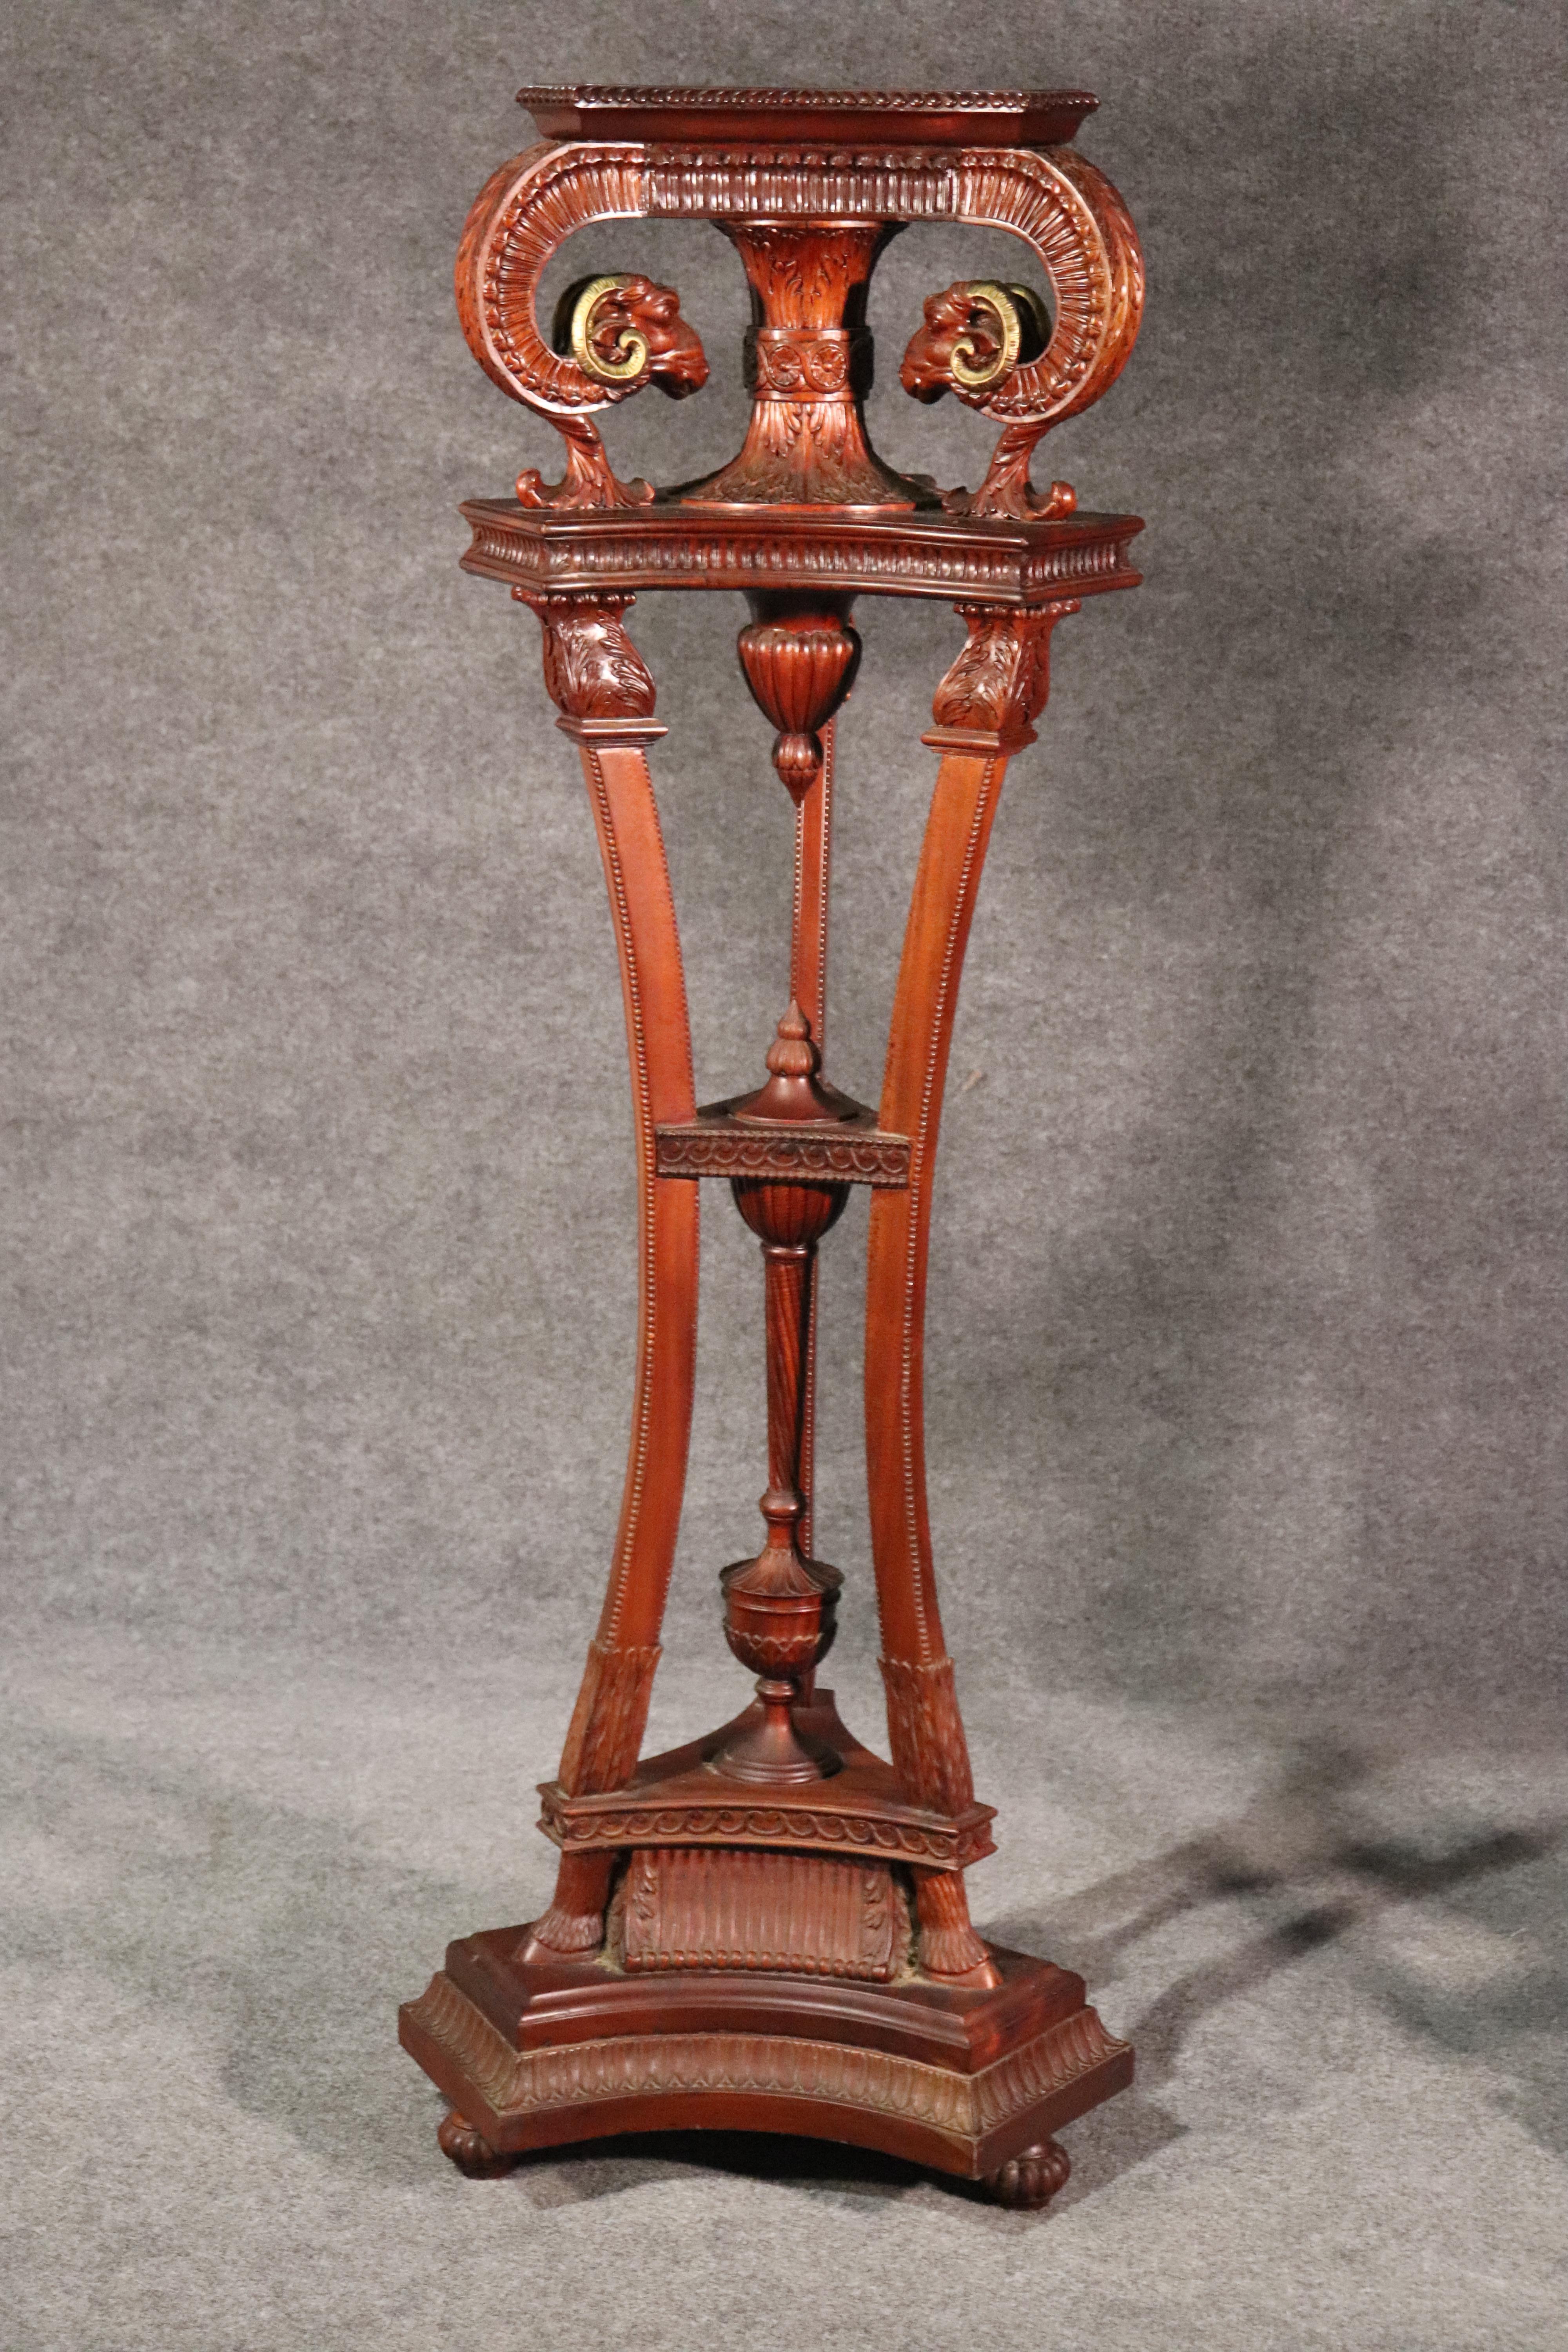 This is a pair of outstanding carved mahogany pedestals. They have fantastic carving and detail and subtle gilded details. They date to the 1950s and are in good condition.
Measures: 57 tall x 18 x 18 at the widest points and 14 x 14 at the top.